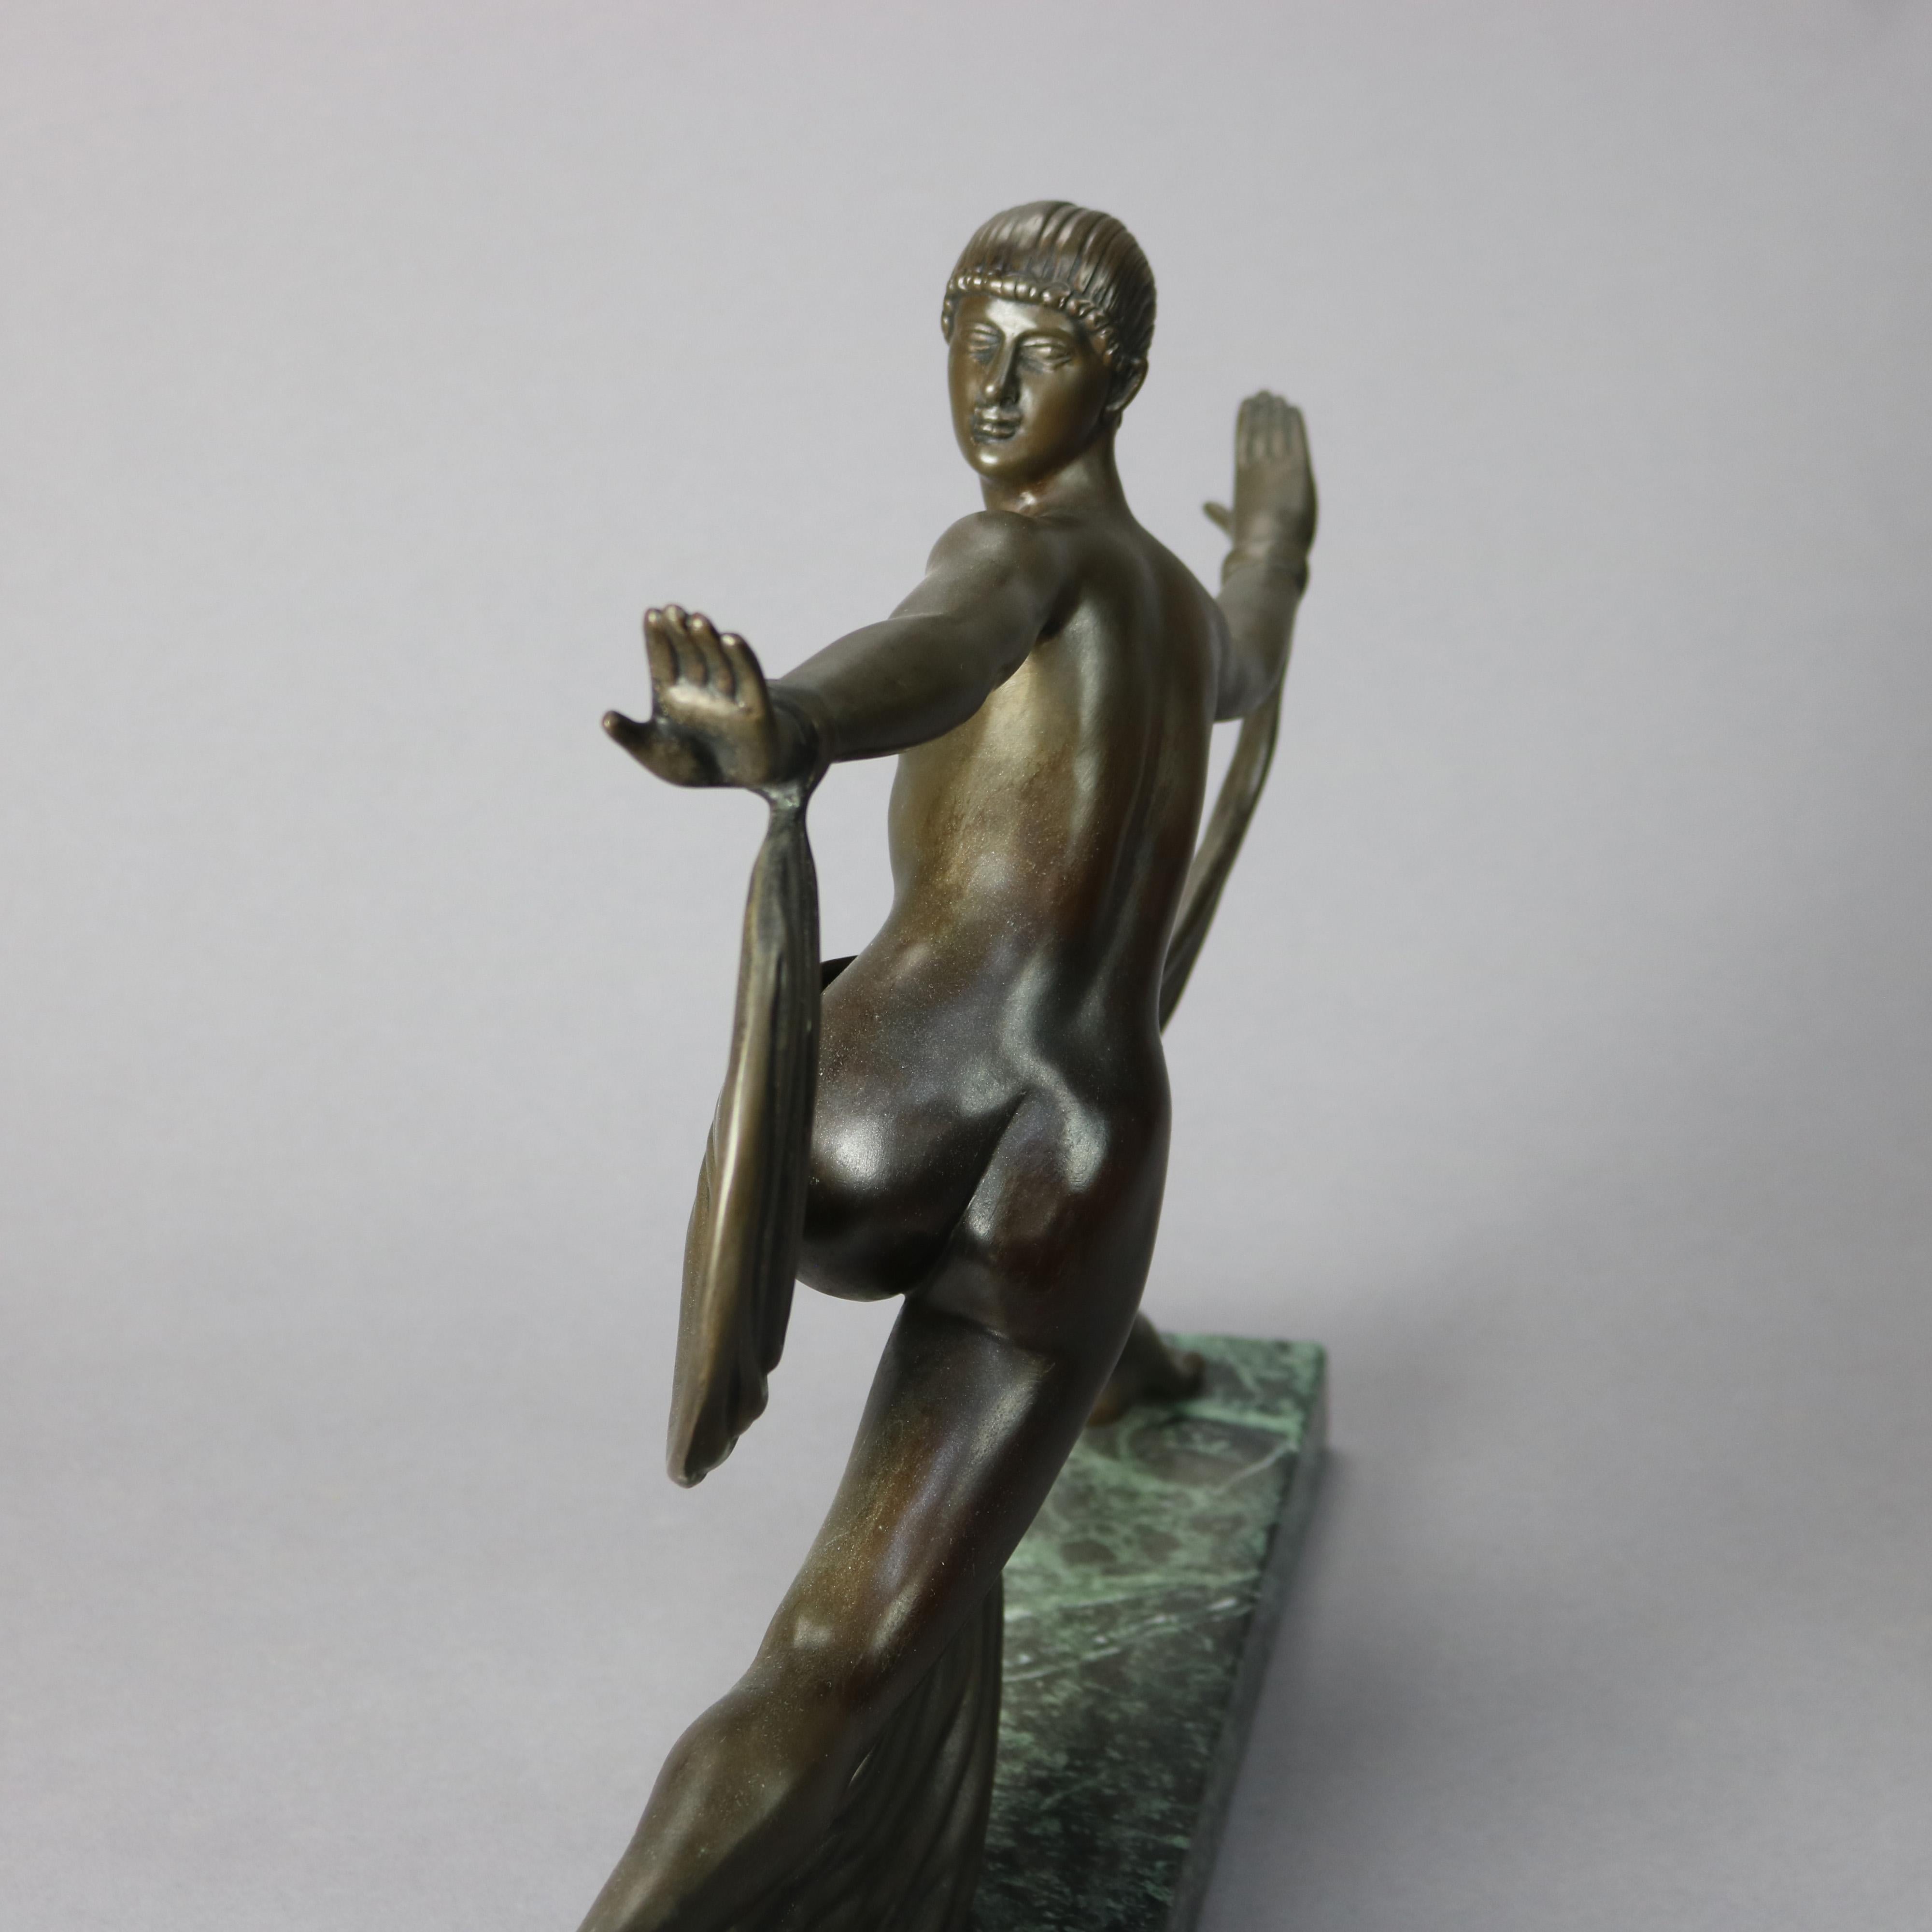 Antique French Art Deco Sculpture Statue of a Woman On Marble Plinth, 20th C. For Sale 7